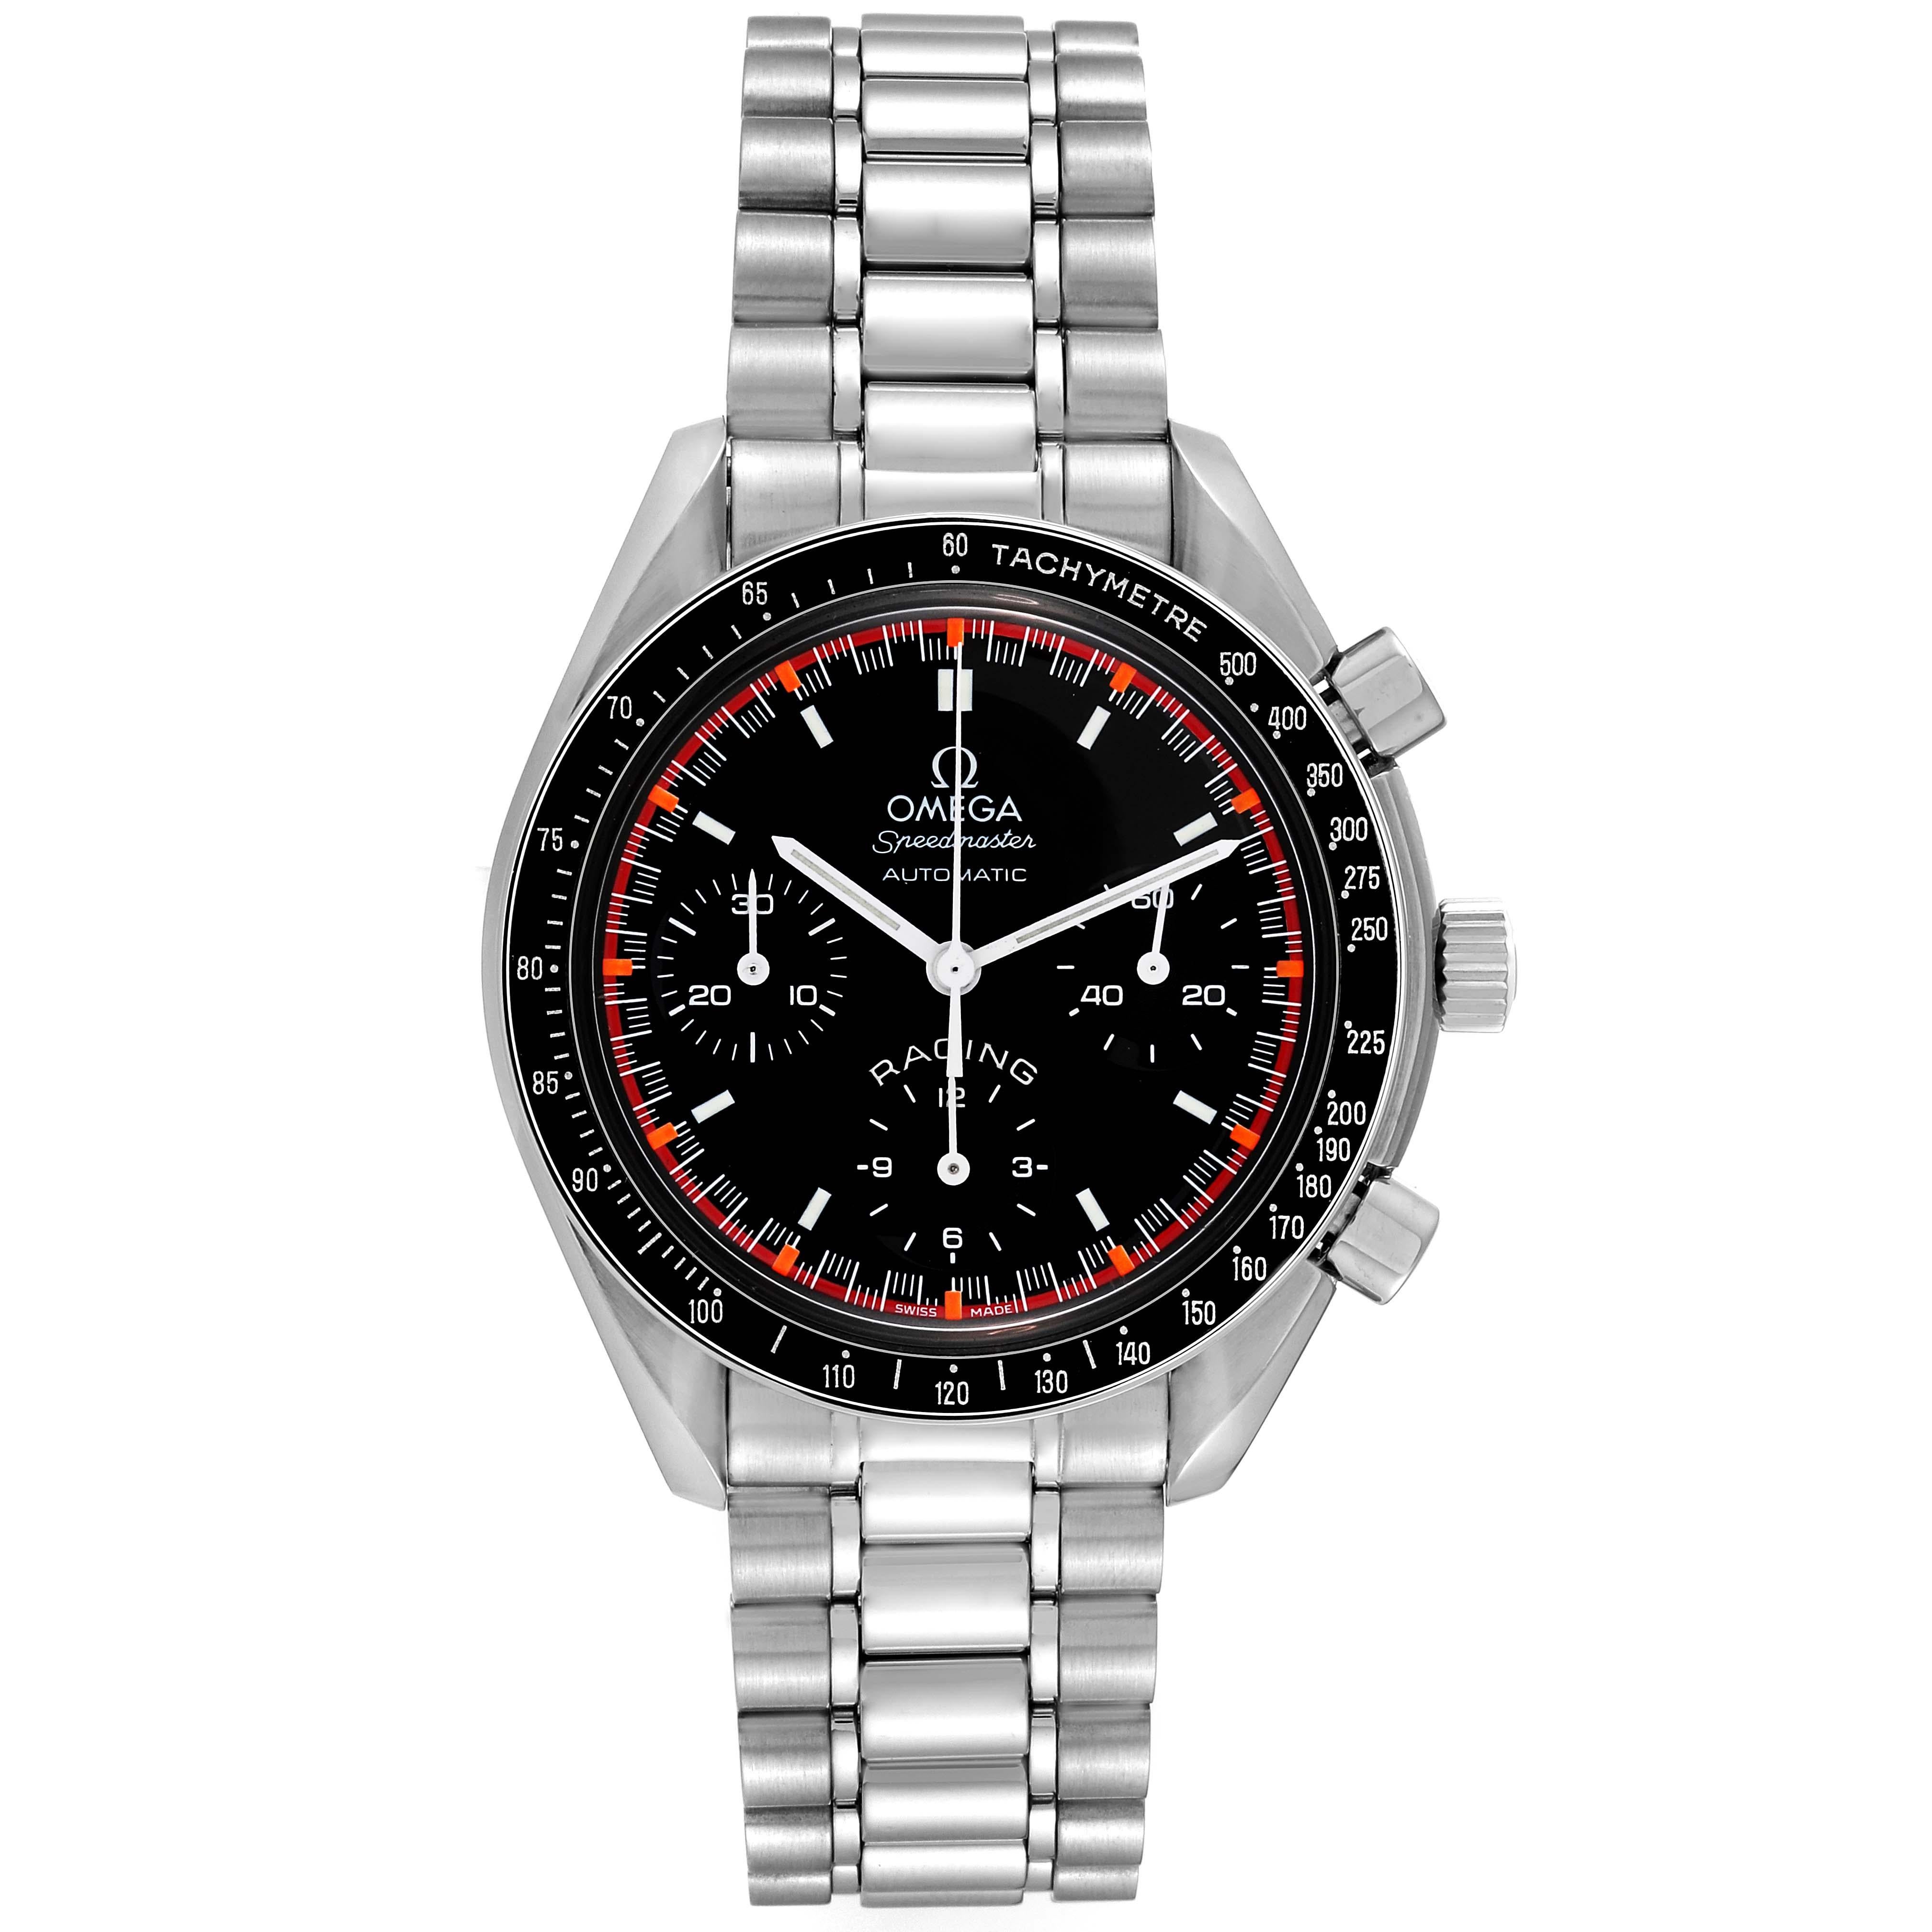 Omega Speedmaster Schumacher Racing Limited Edition Steel Mens Watch 3518.50.00 Box Card. Automatic self-winding movement. Caliber 3220. Stainless steel round case 39 mm in diameter. Stainless steel bezel with tachymeter function. Hesalite crystal.